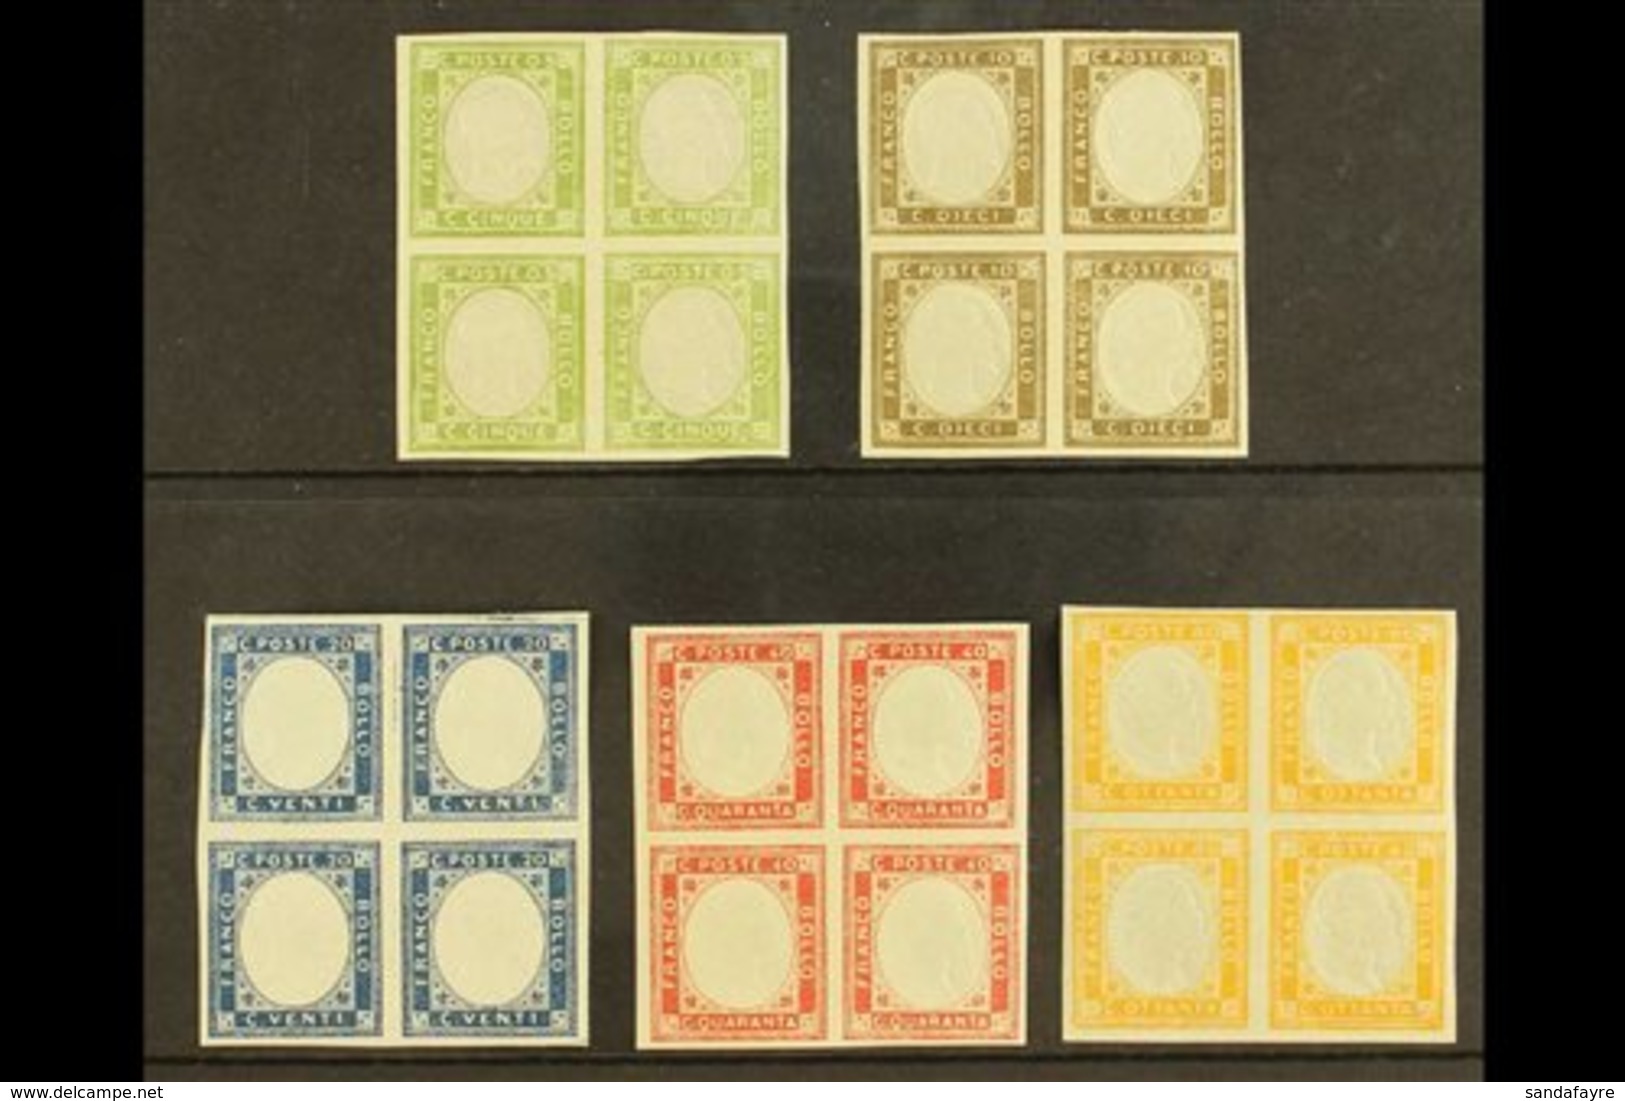 NEAPOLITAN PROVINCES 1861 Local Issue, Complete Set, Sass S1, In Superb BLOCKS OF 4 (2nh, 2og). Cat €1500.(£1125)  (5 Bl - Unclassified